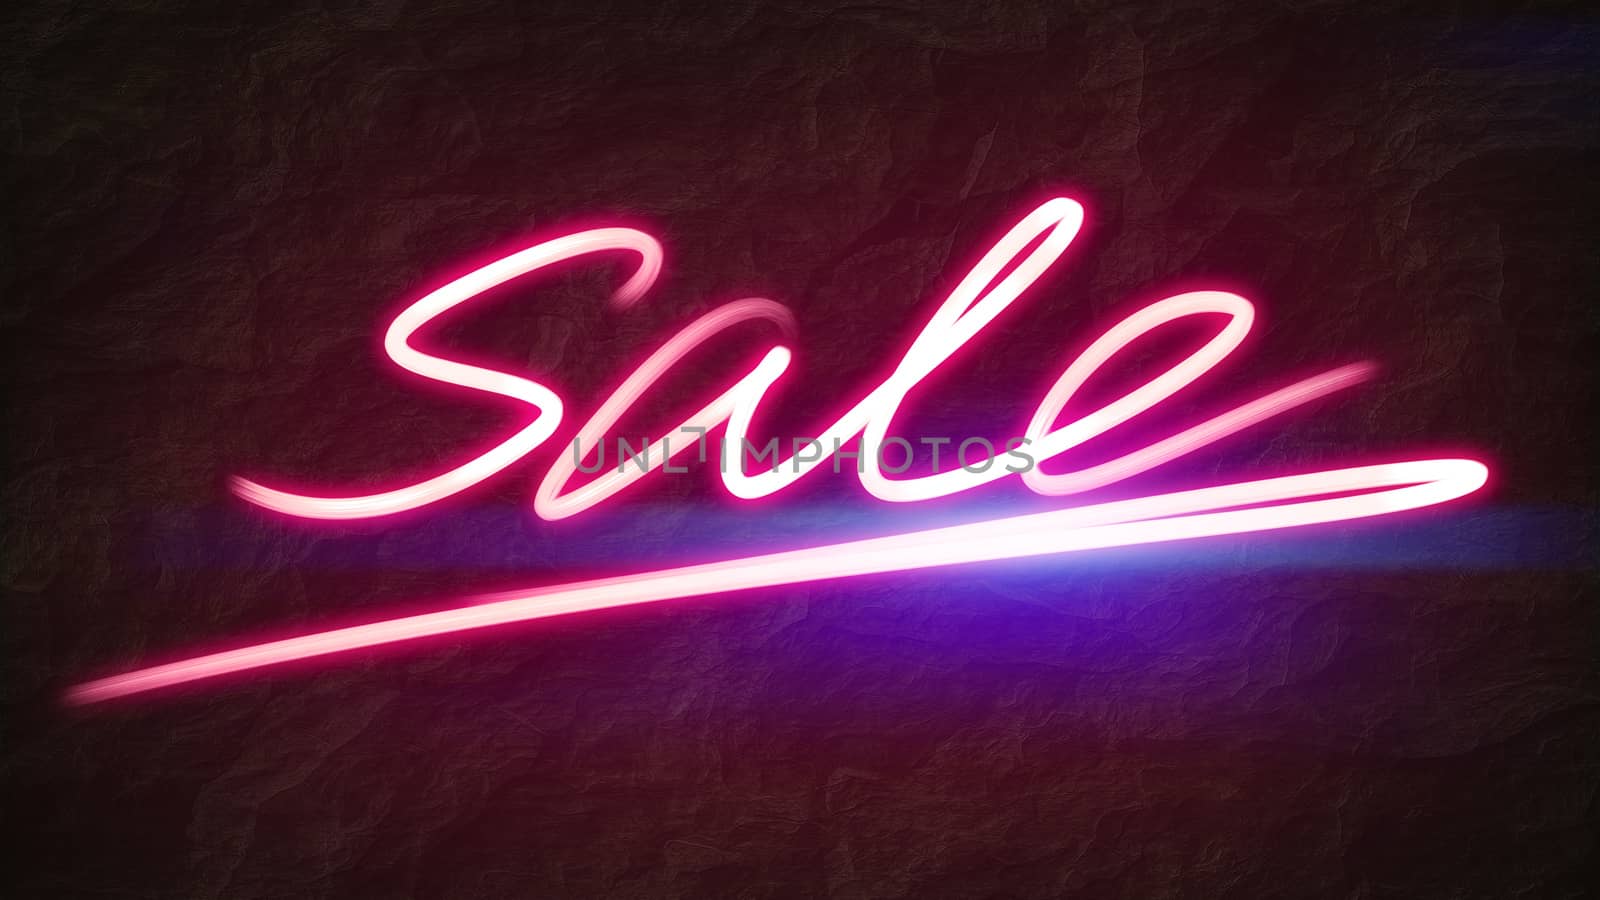 An illustration of a pink sale light painting